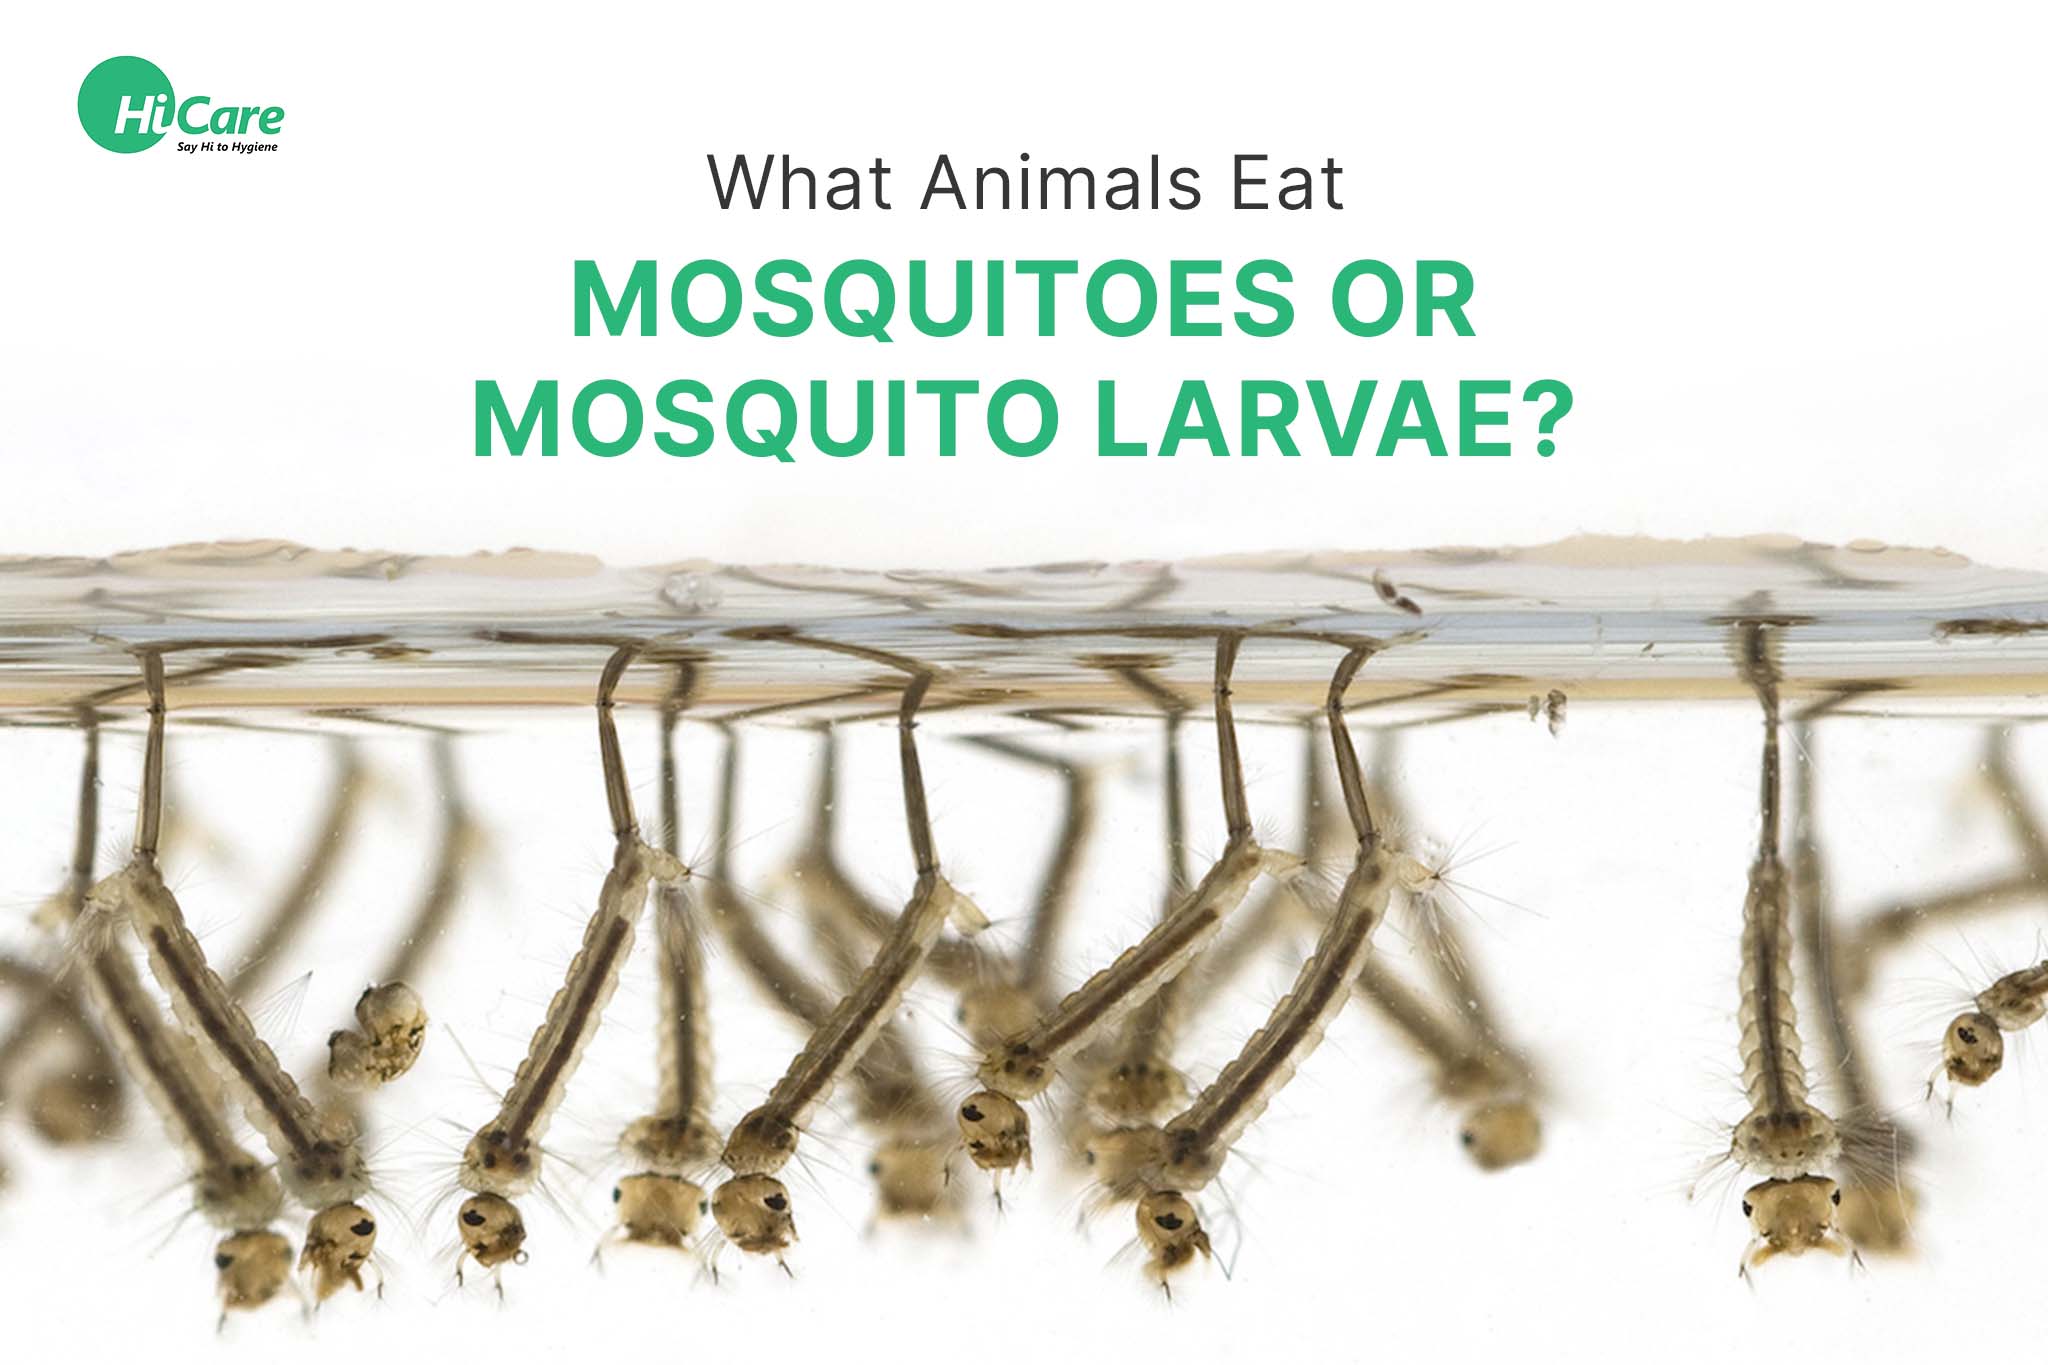 What Animals Eat Mosquitoes or Mosquito Larvae?